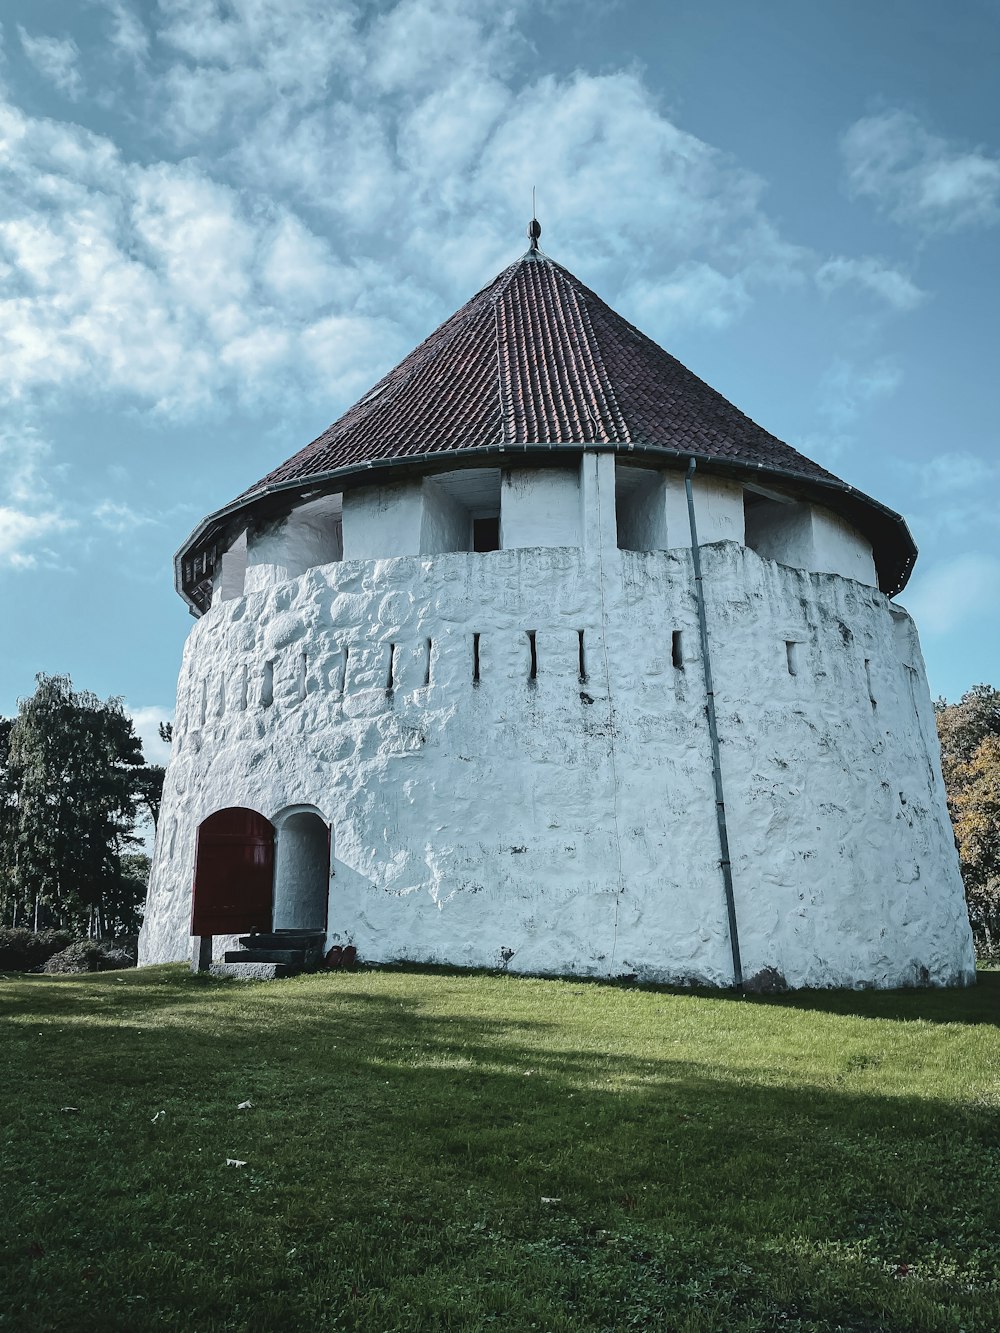 a large white tower with a brown roof